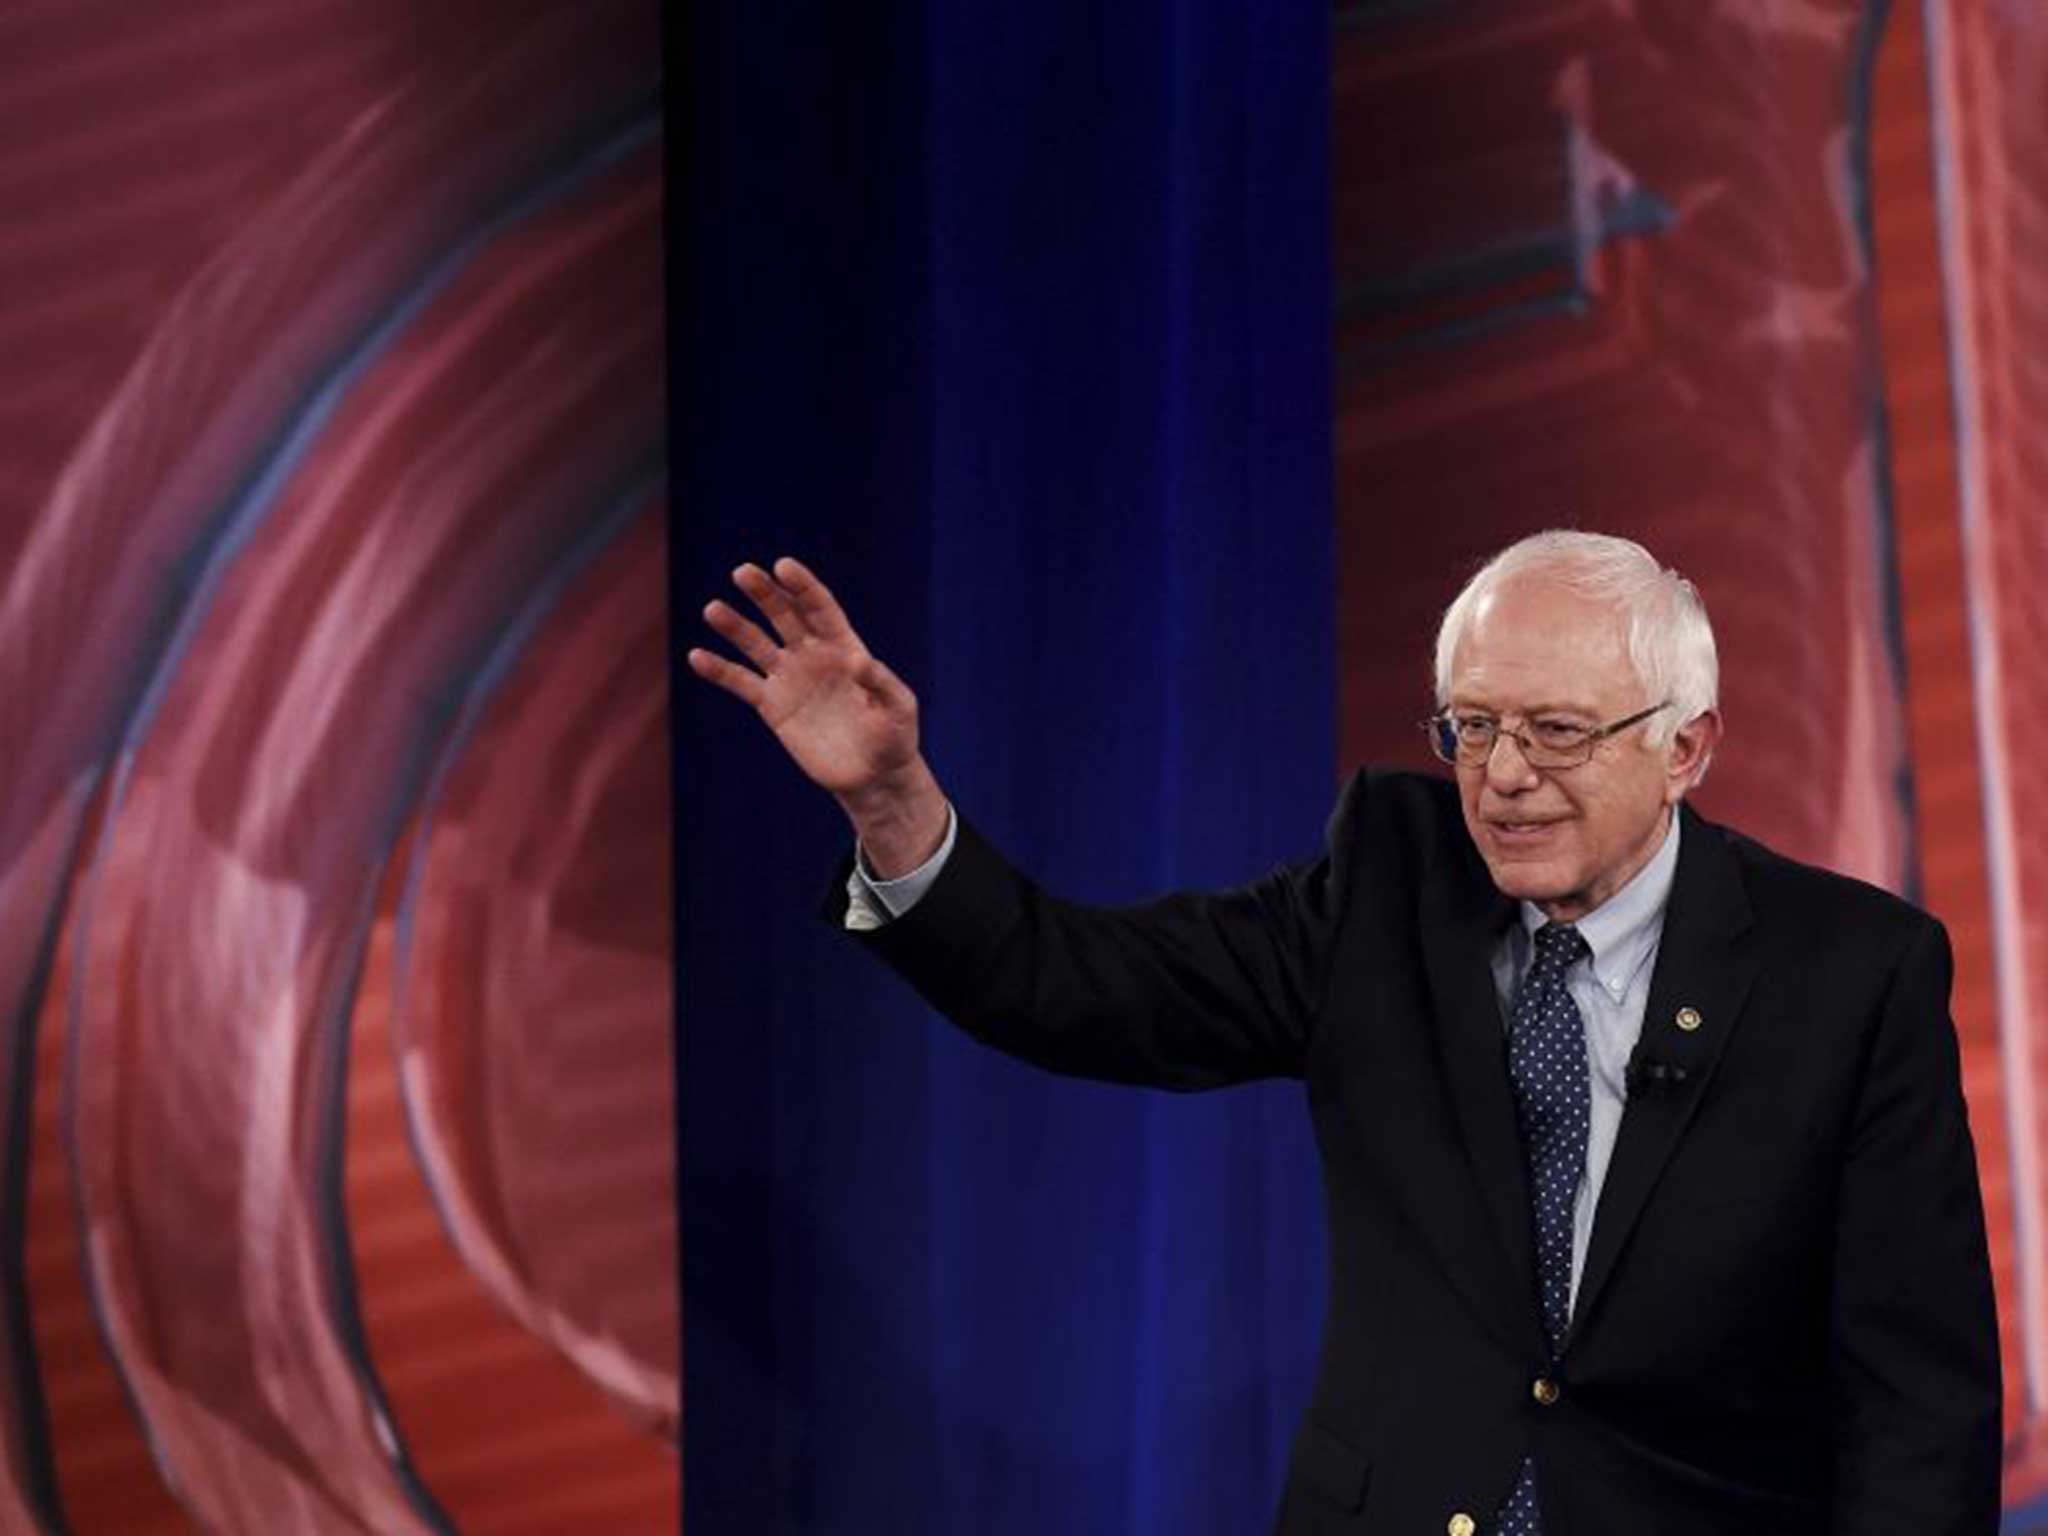 Bernie Sanders also asked his Reddit supporters to donate to his campaign